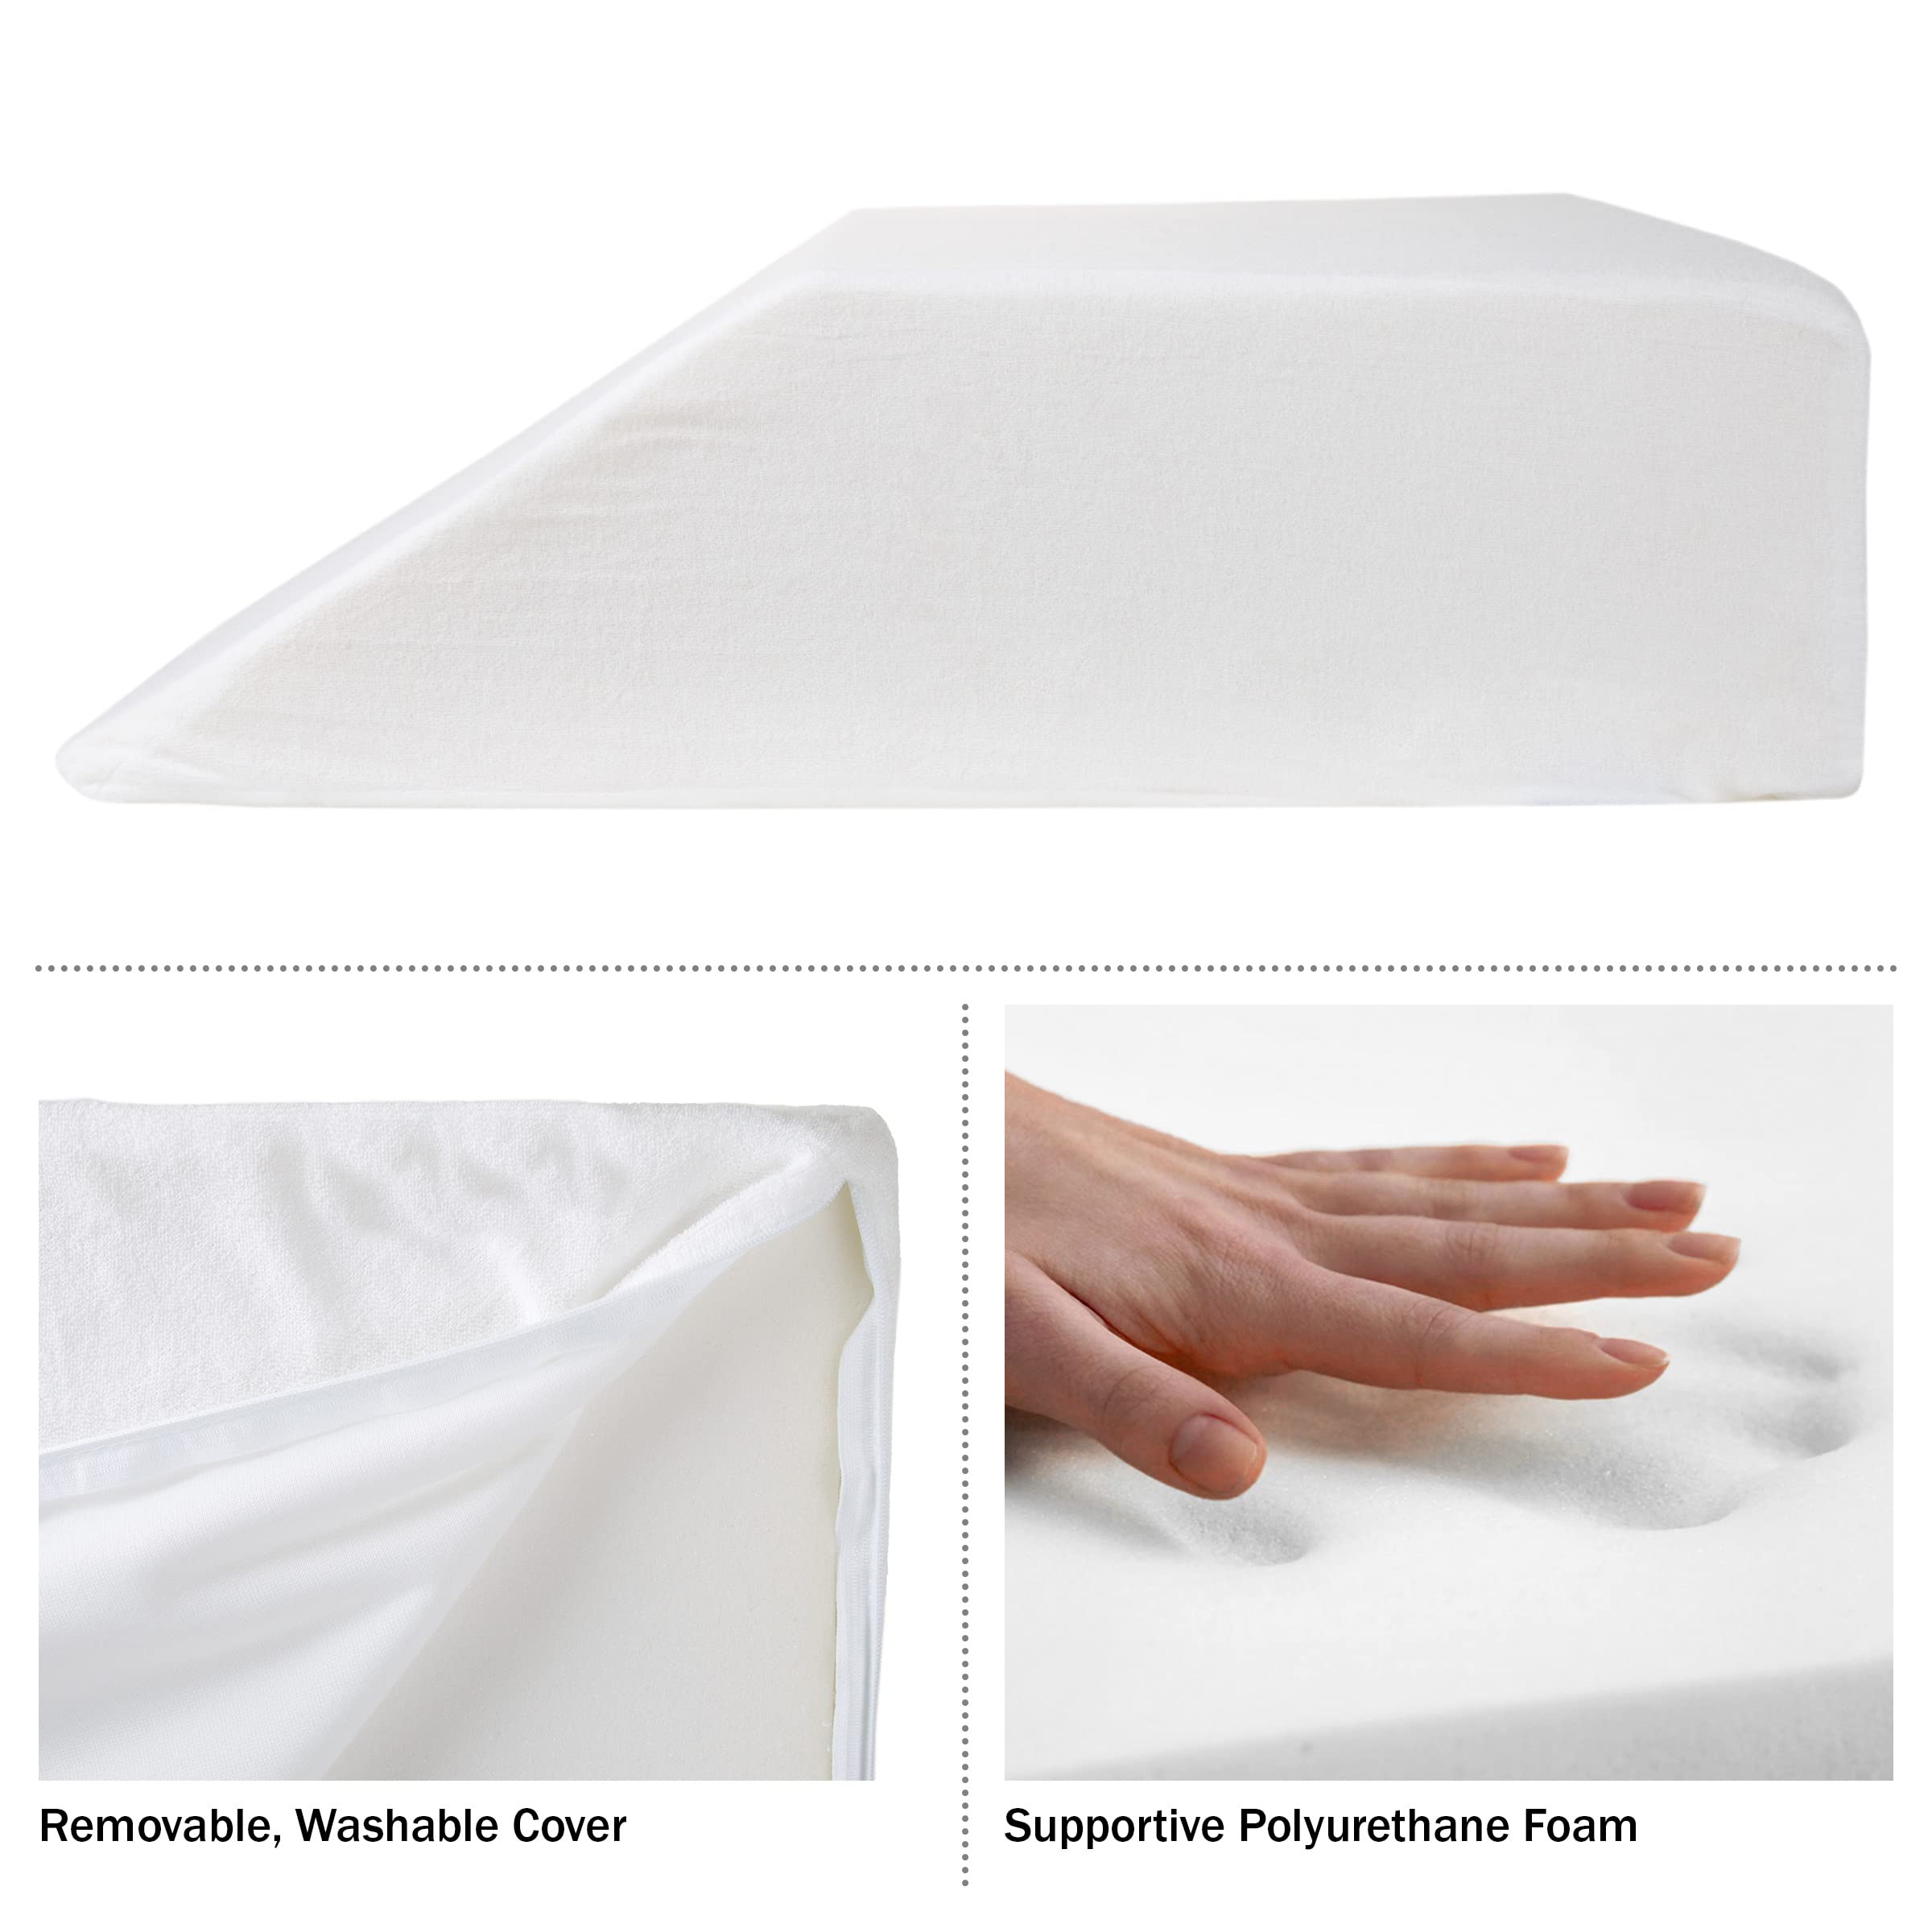 Lavish Home Foam Wedge Pillow with Removable Zippered Cover, Elevated Pillow for Sleeping or Sitting in Bed, Helps with Snoring, Acid Reflux, Provides Neck & Back Support